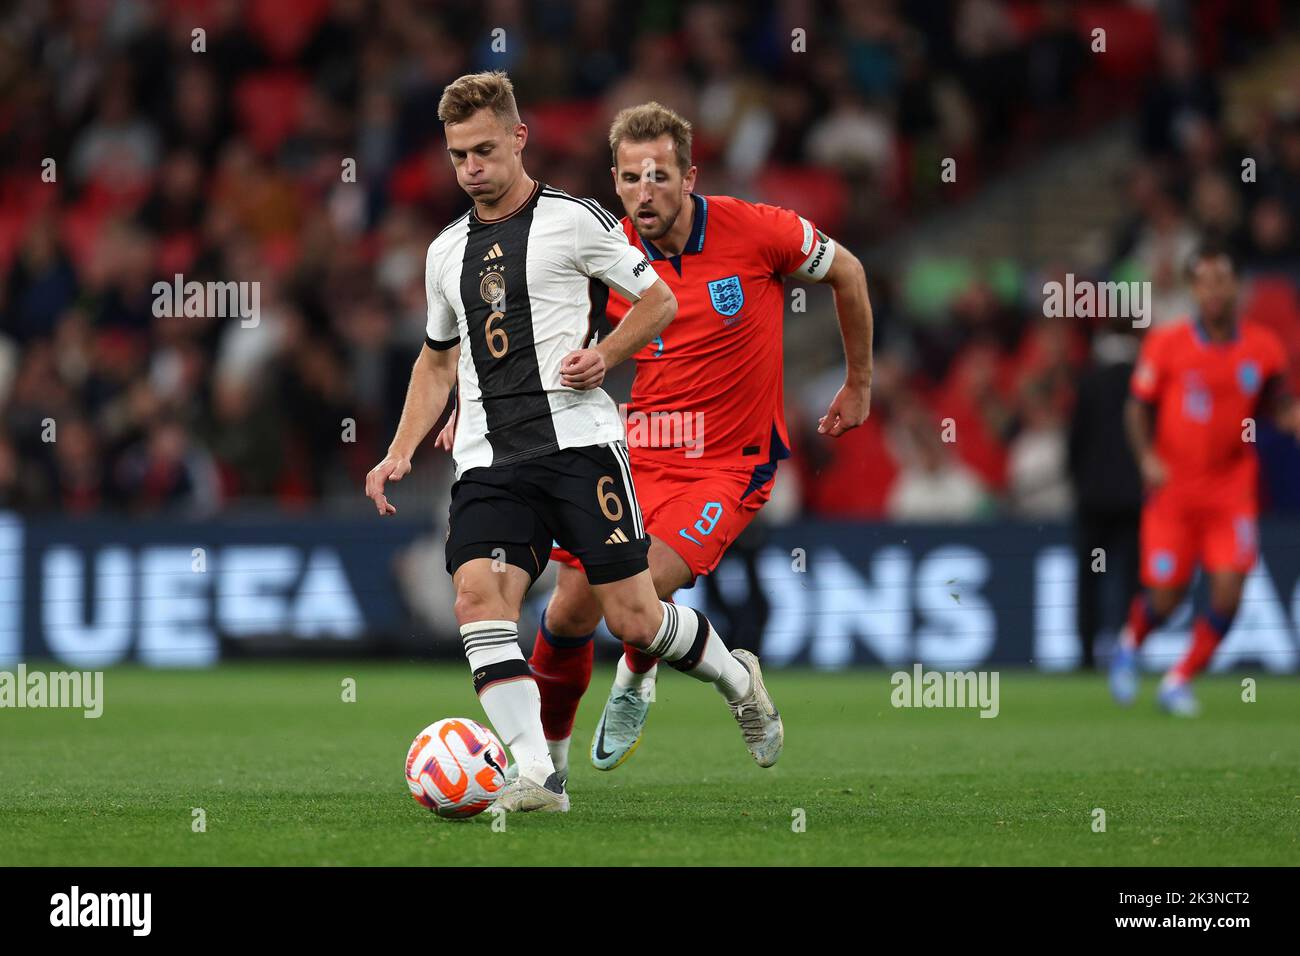 London, UK. 26th Sep, 2022. Joshua Kimmich of Germany (r) & Harry Kane of England (l) in action. England v Germany, UEFA Nations league International group C match at Wembley Stadium in London on Monday 26th September 2022. Editorial use only. pic by Andrew Orchard/Andrew Orchard sports photography/Alamy Live News Credit: Andrew Orchard sports photography/Alamy Live News Stock Photo